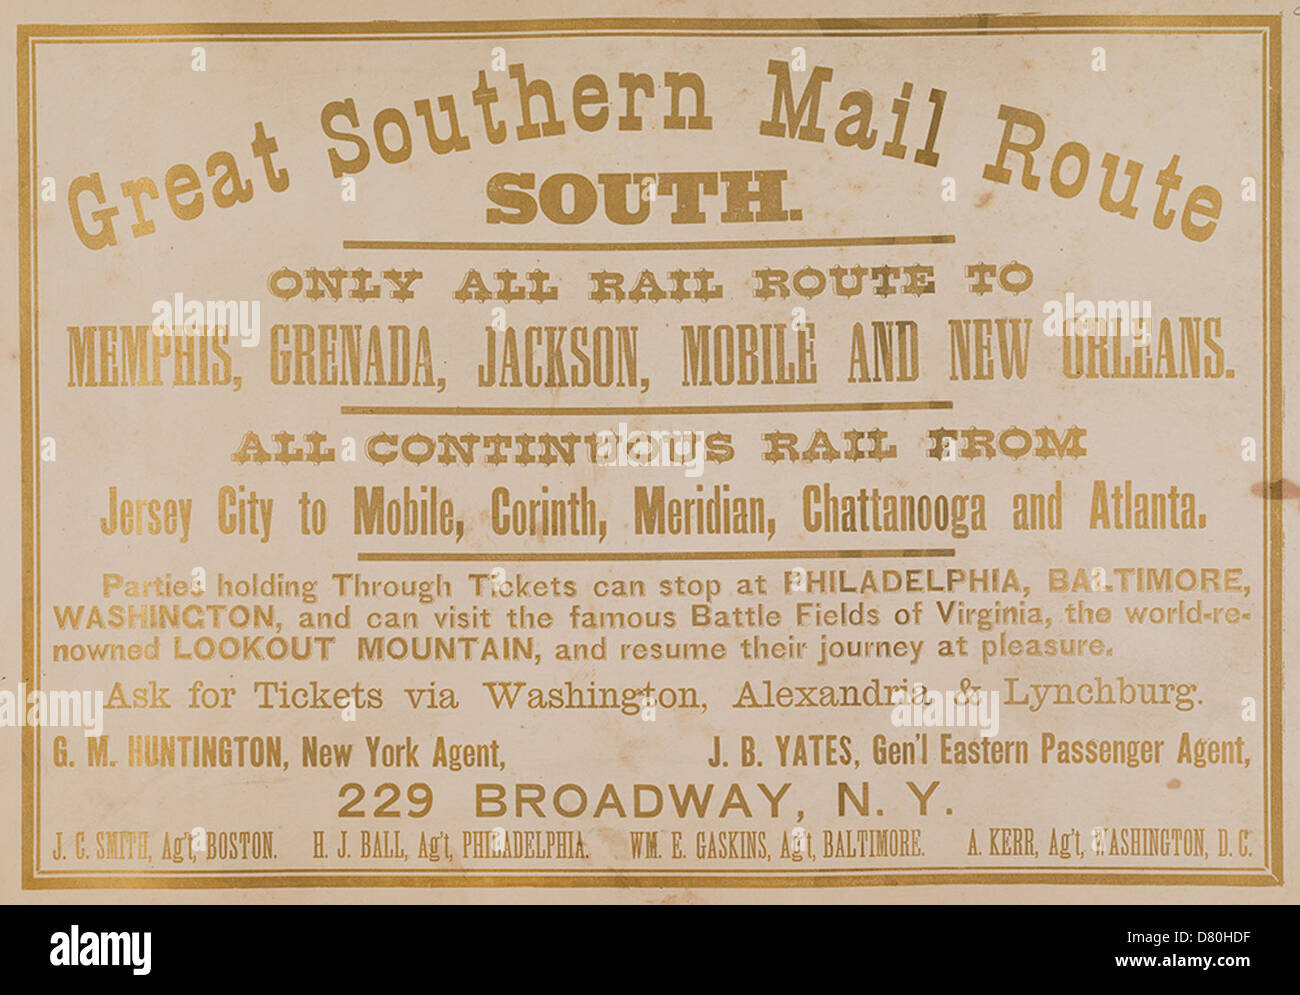 Great Southern Mail Route. Stock Photo